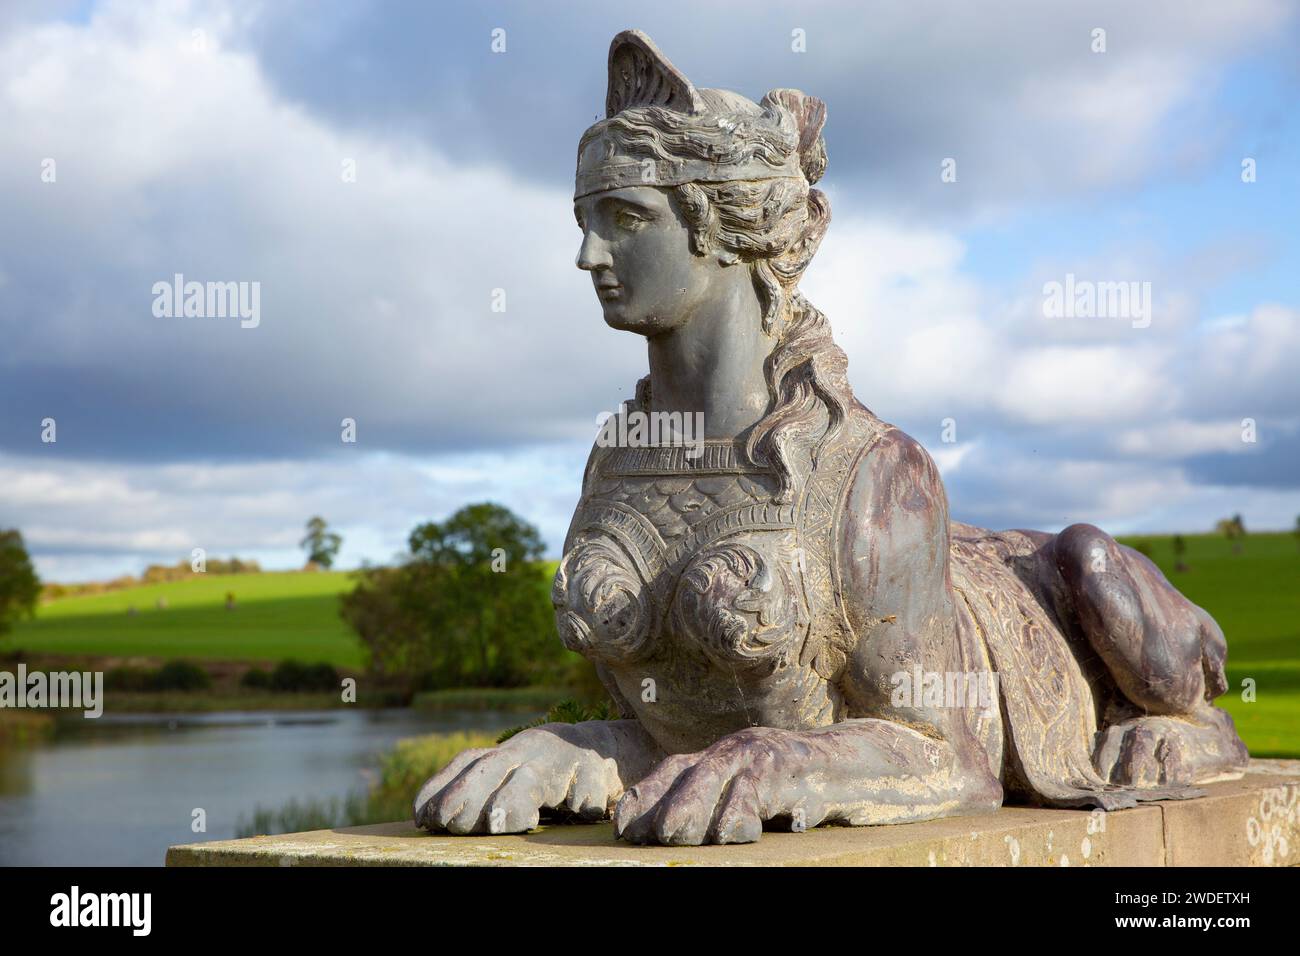 A sphinx sculpture on Upper Bridge at Compton Verney House, an 18th-century country mansion near Kineton in Warwickshire, England. Stock Photo